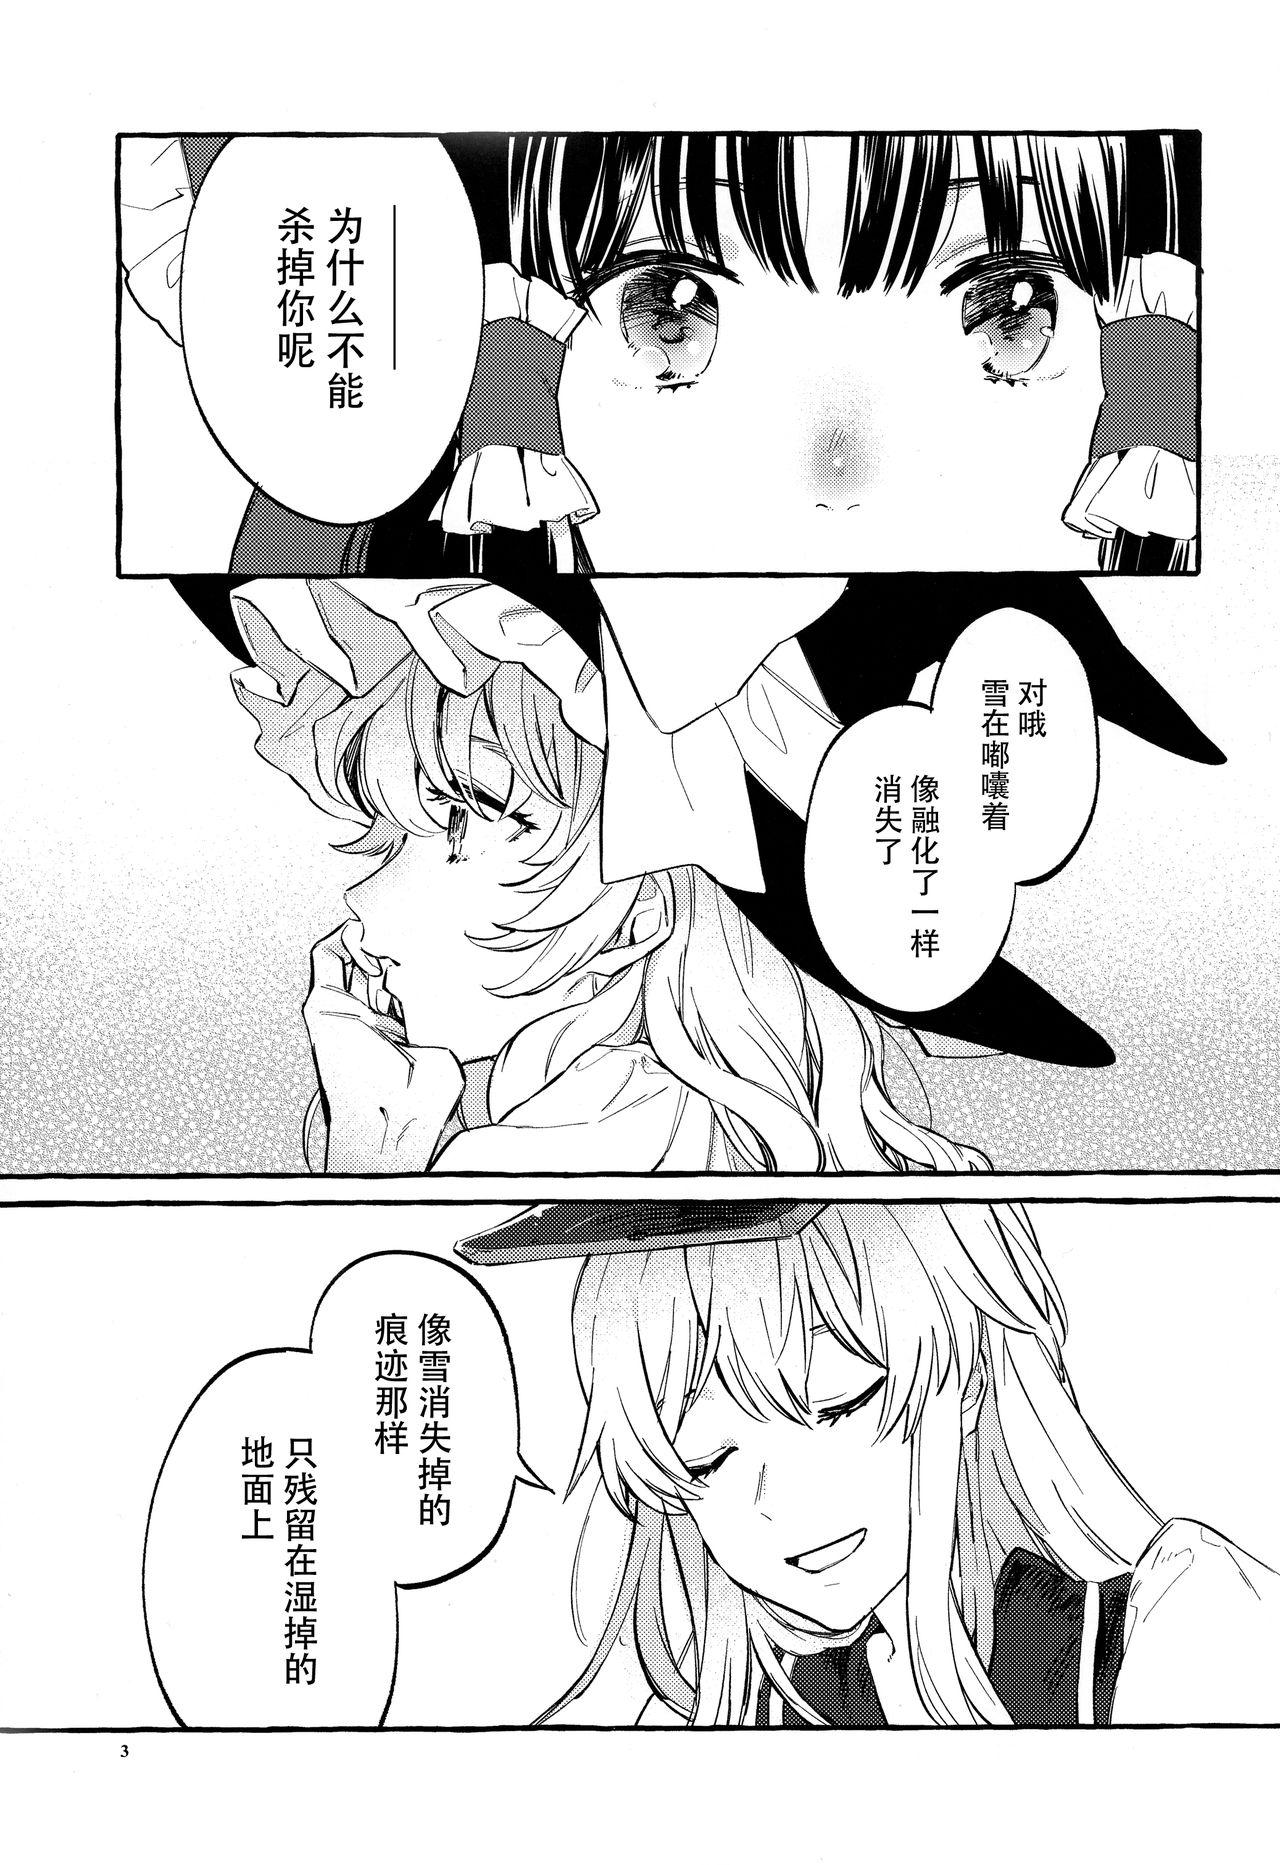 Rub Happy End Standard - Touhou project Indo - Page 2